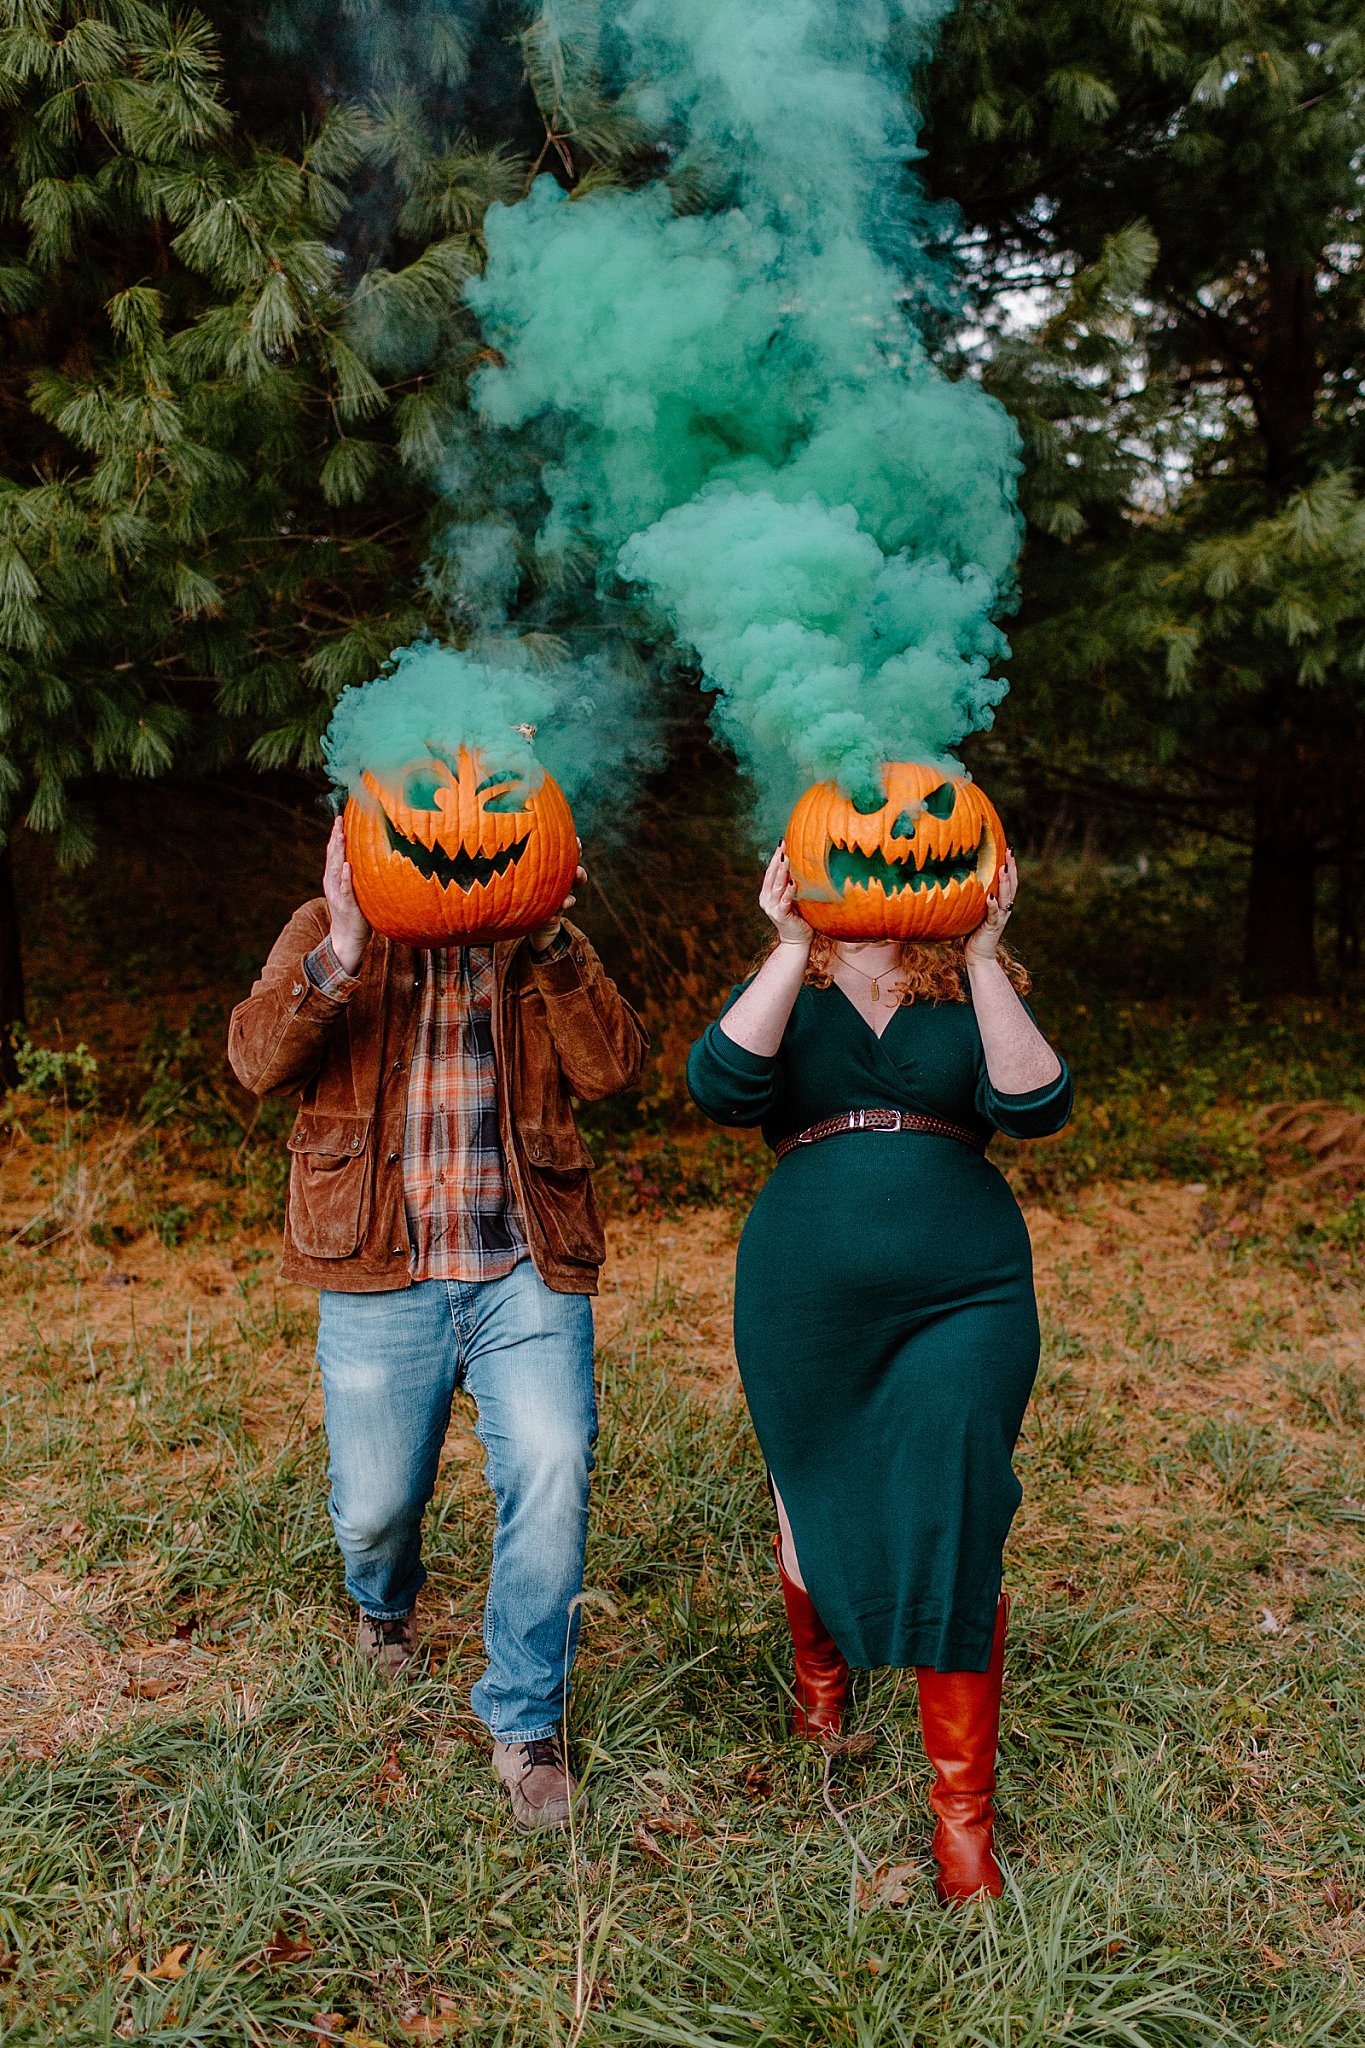  Smoke spills out of jack-o-lanterns at Halloween engagement session 